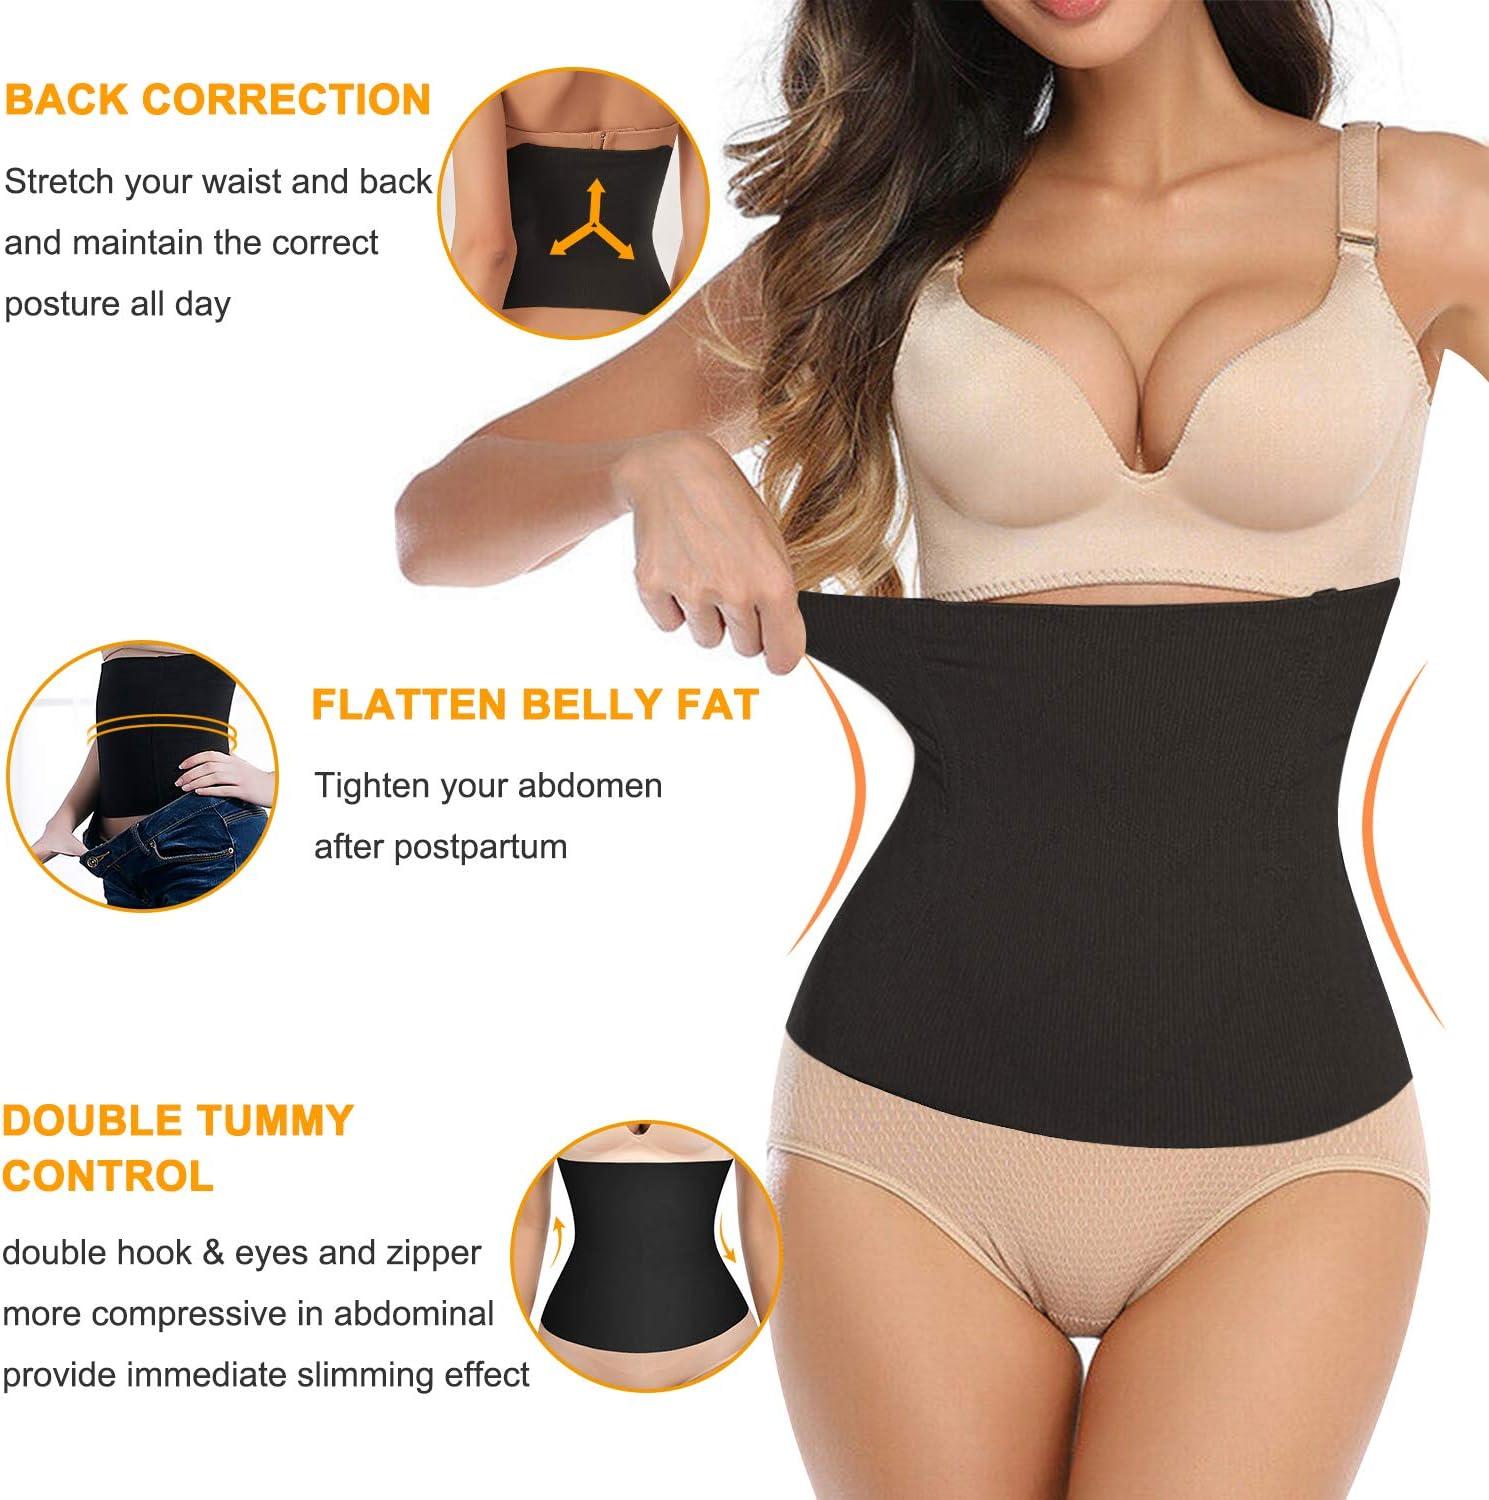 Bingrong 2 in 1 Waist Trainer for Women Postpartum Belly Band Maternity  Recovery Belt Seamless Girdle Tummy Control Body Shaper Shapewear Black L